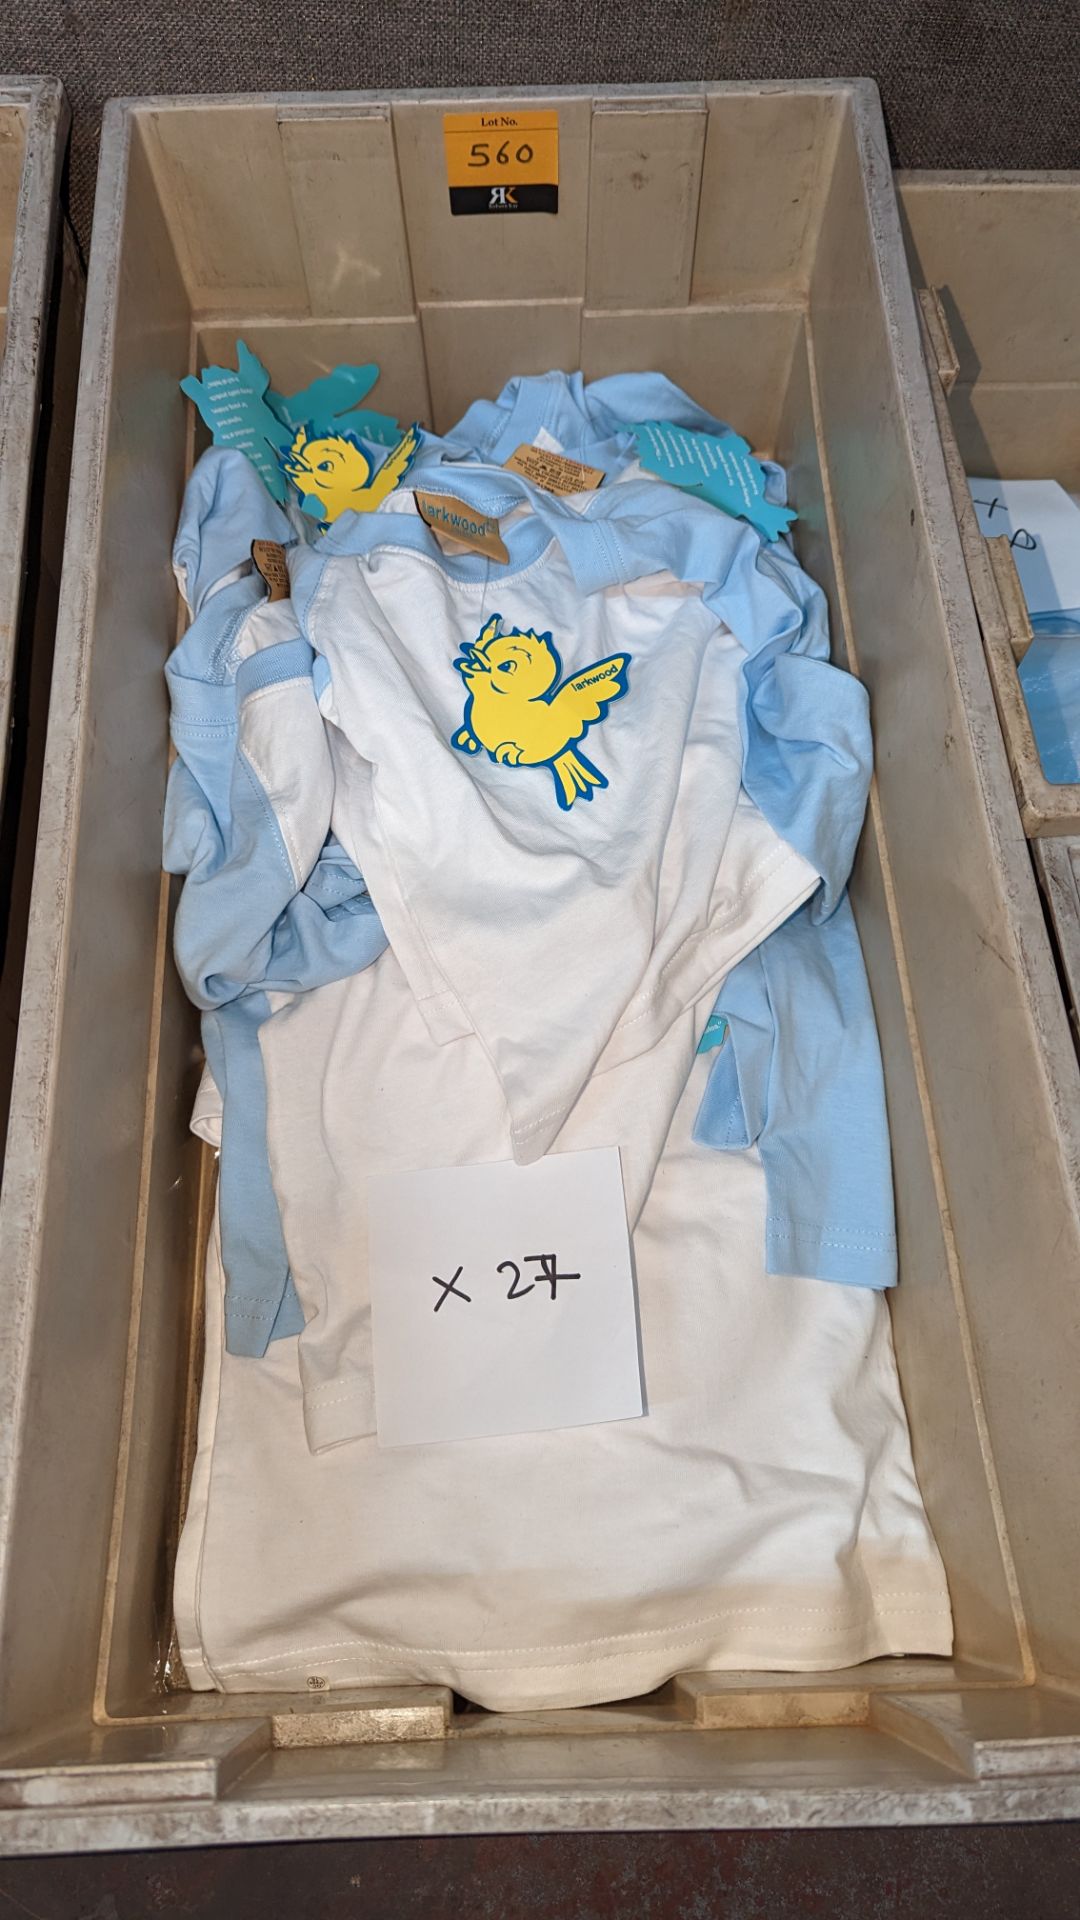 27 off Larkwood baby's long sleeve t-shirts each with white body & blue sleeves in assorted sizes - - Image 2 of 3